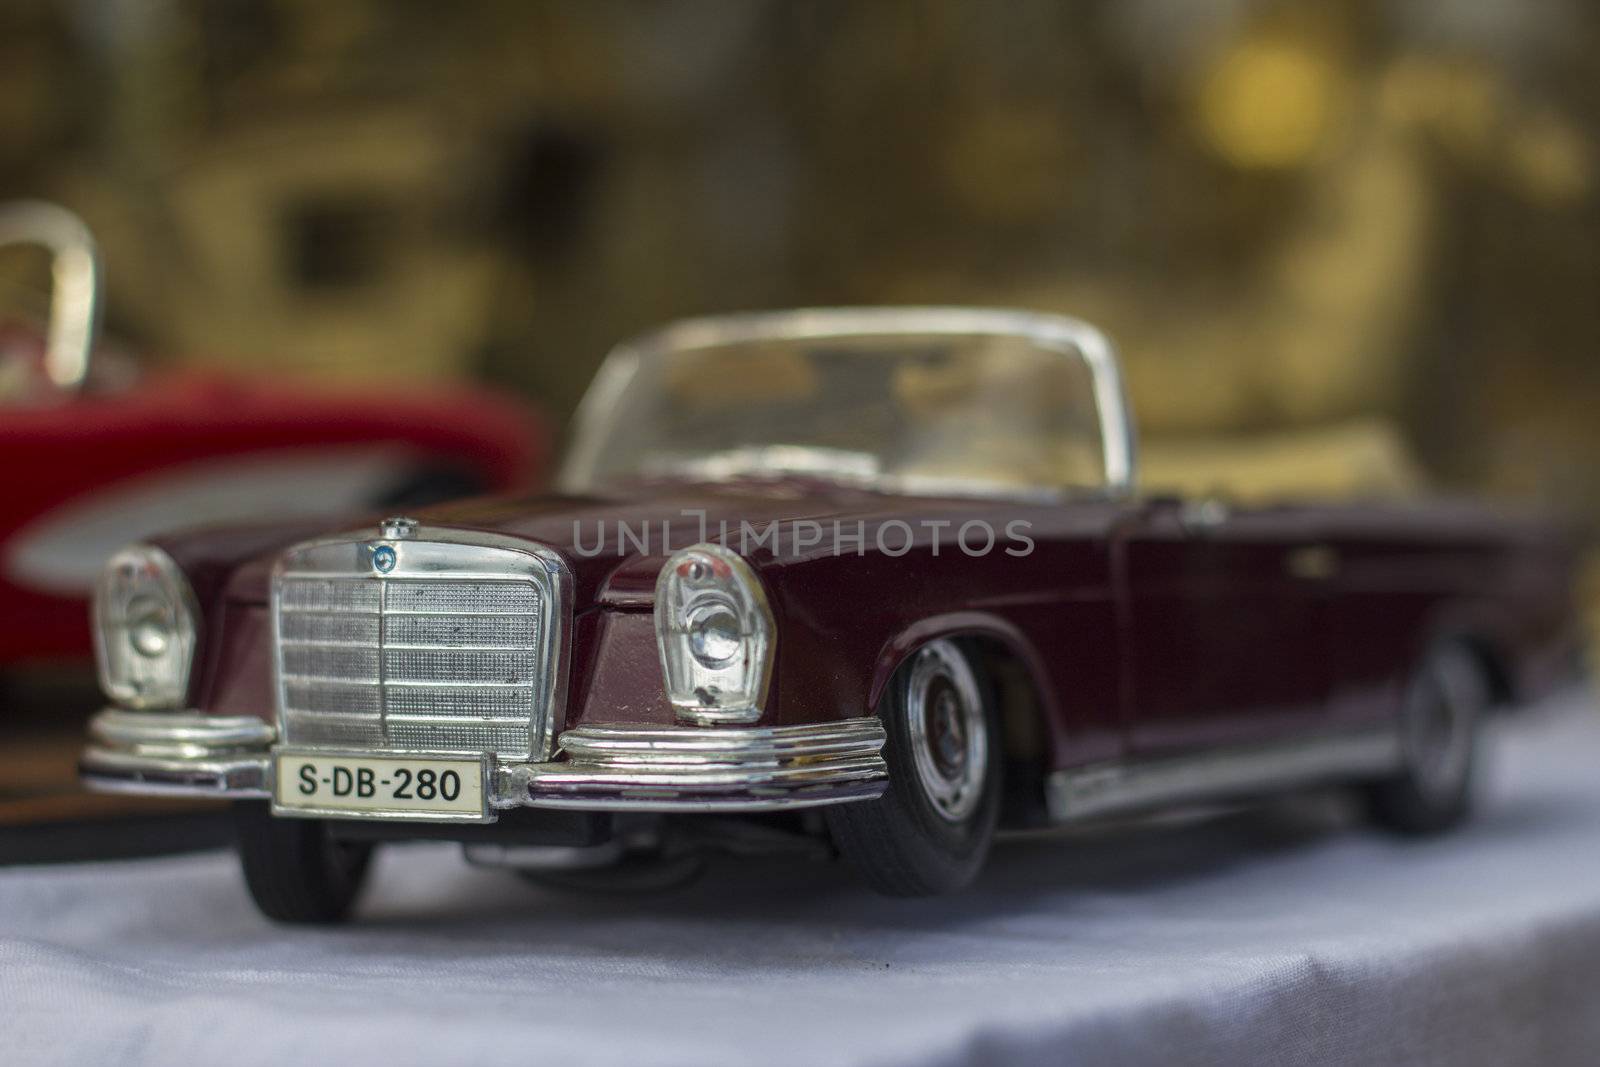 A toy old car on a exhibition